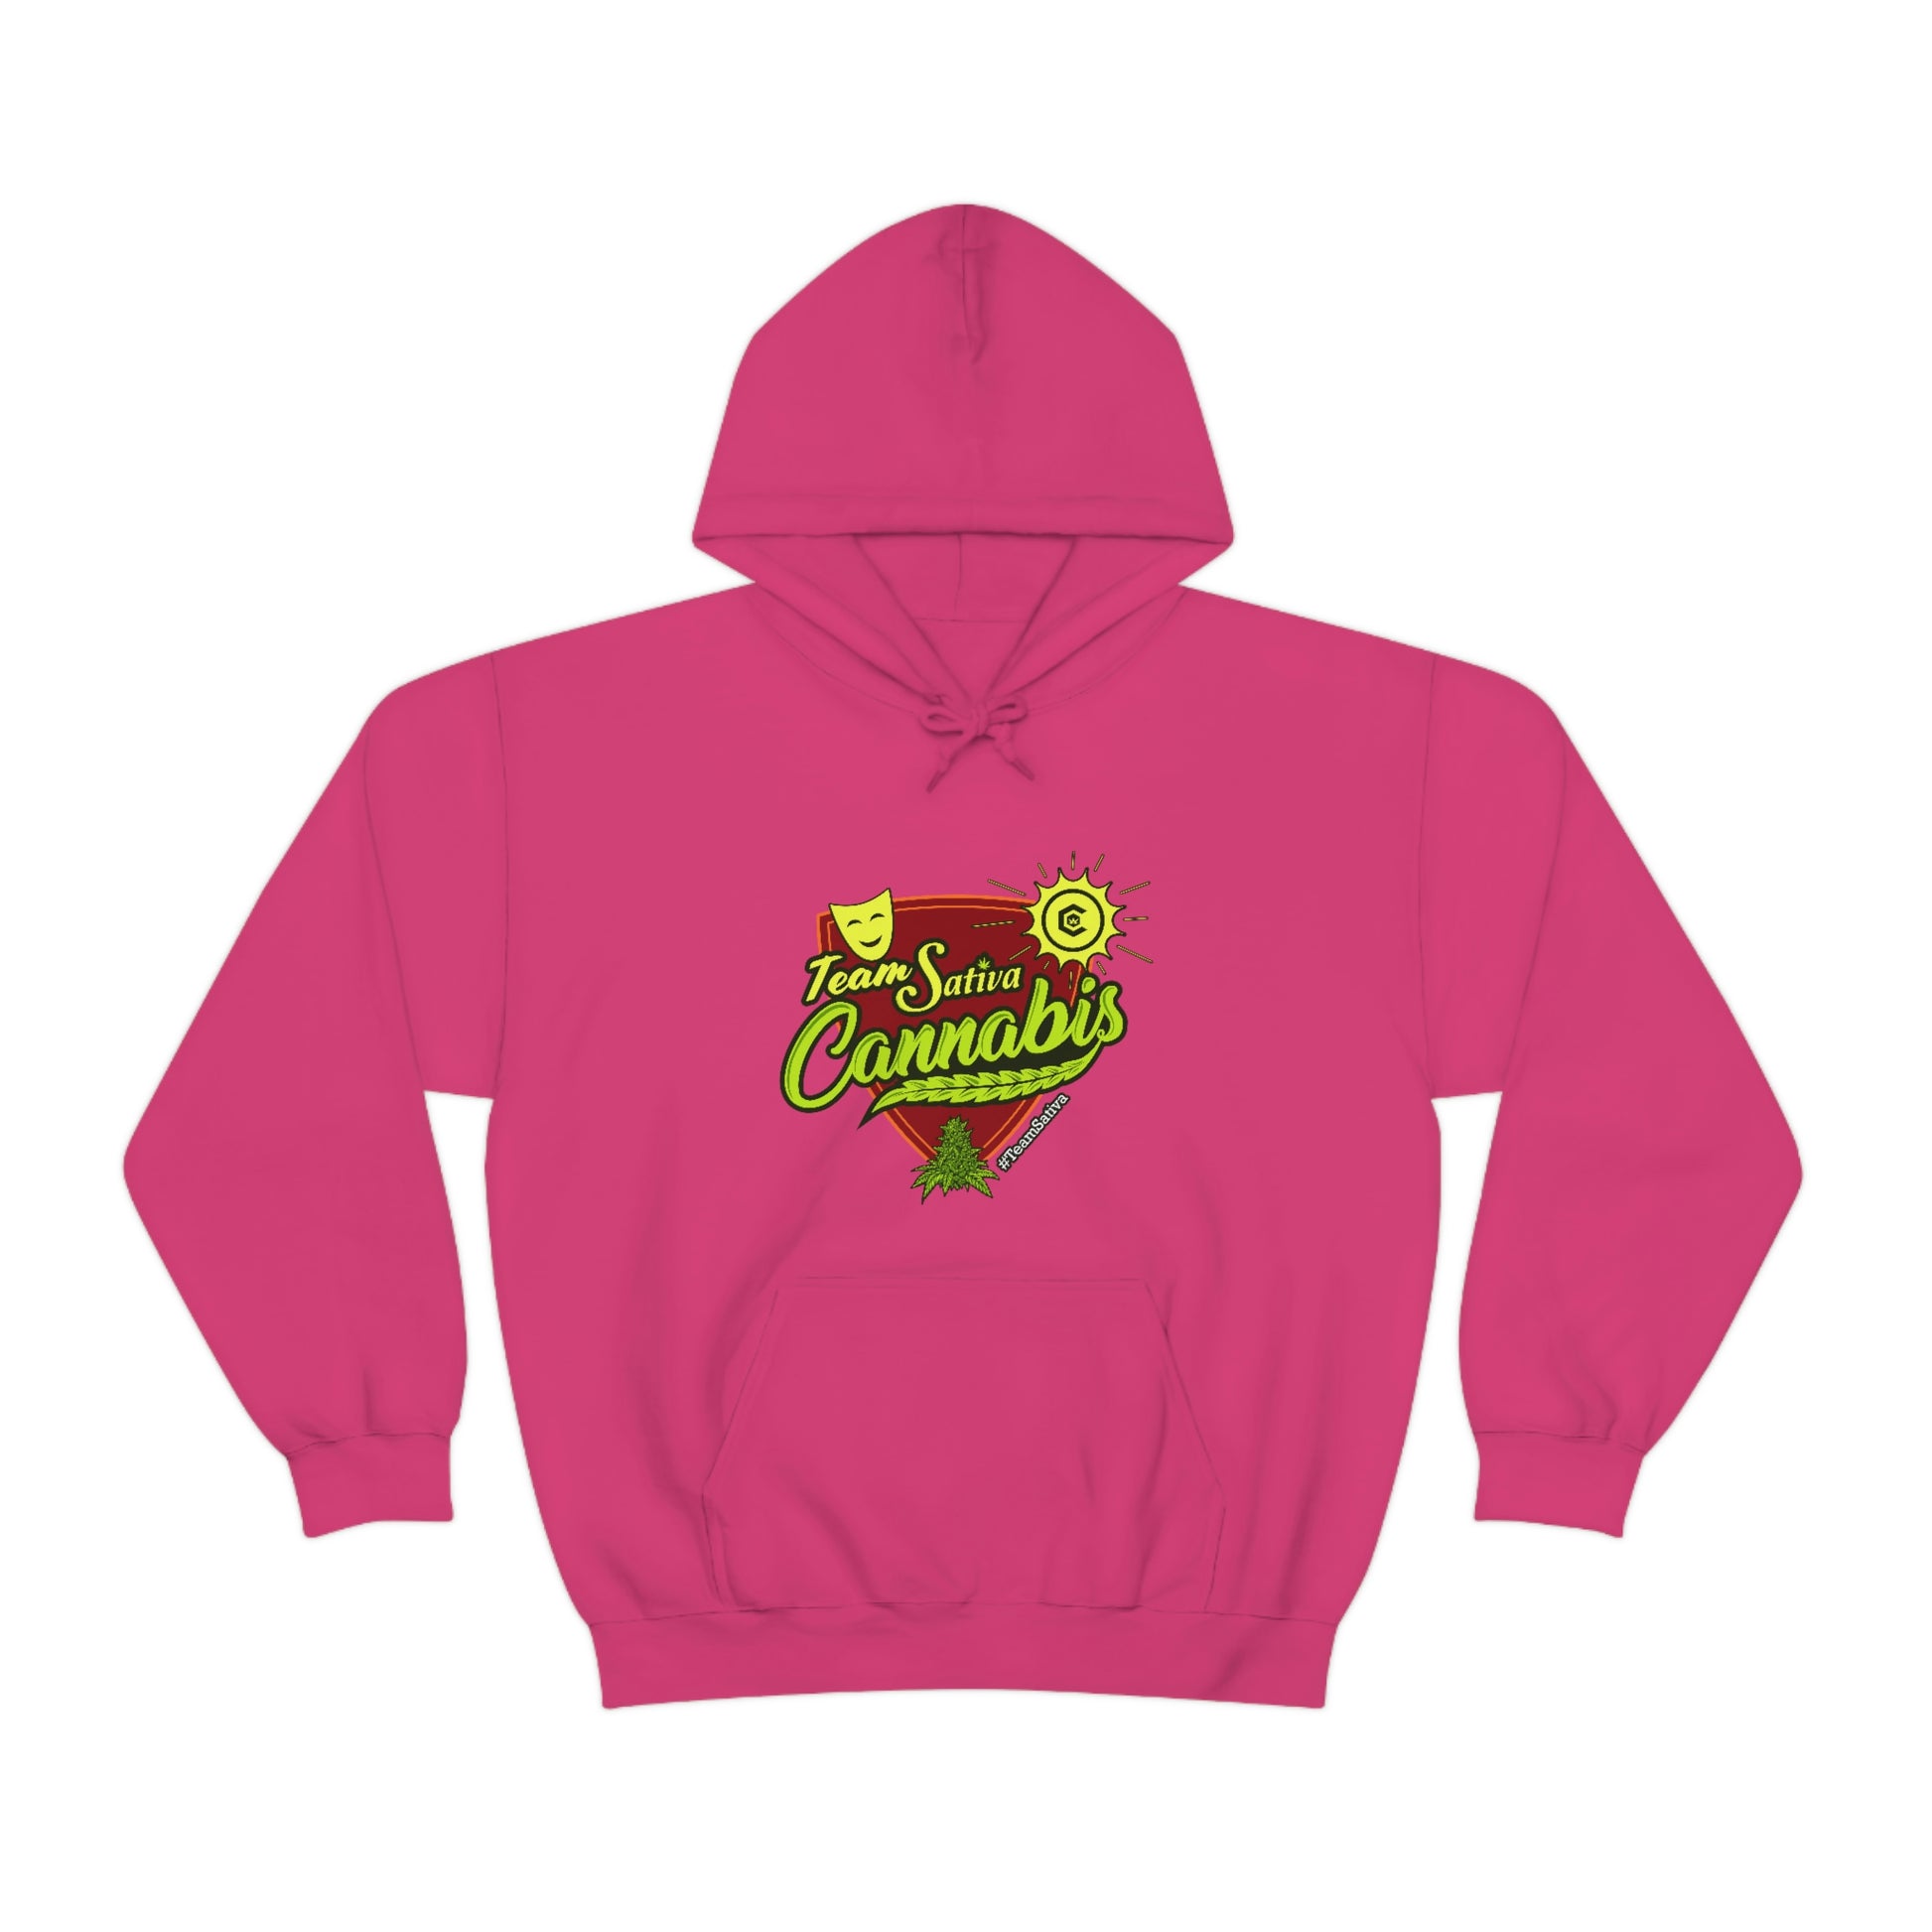 a Team Sativa Stoner Sweatshirt with a green and yellow logo on it.